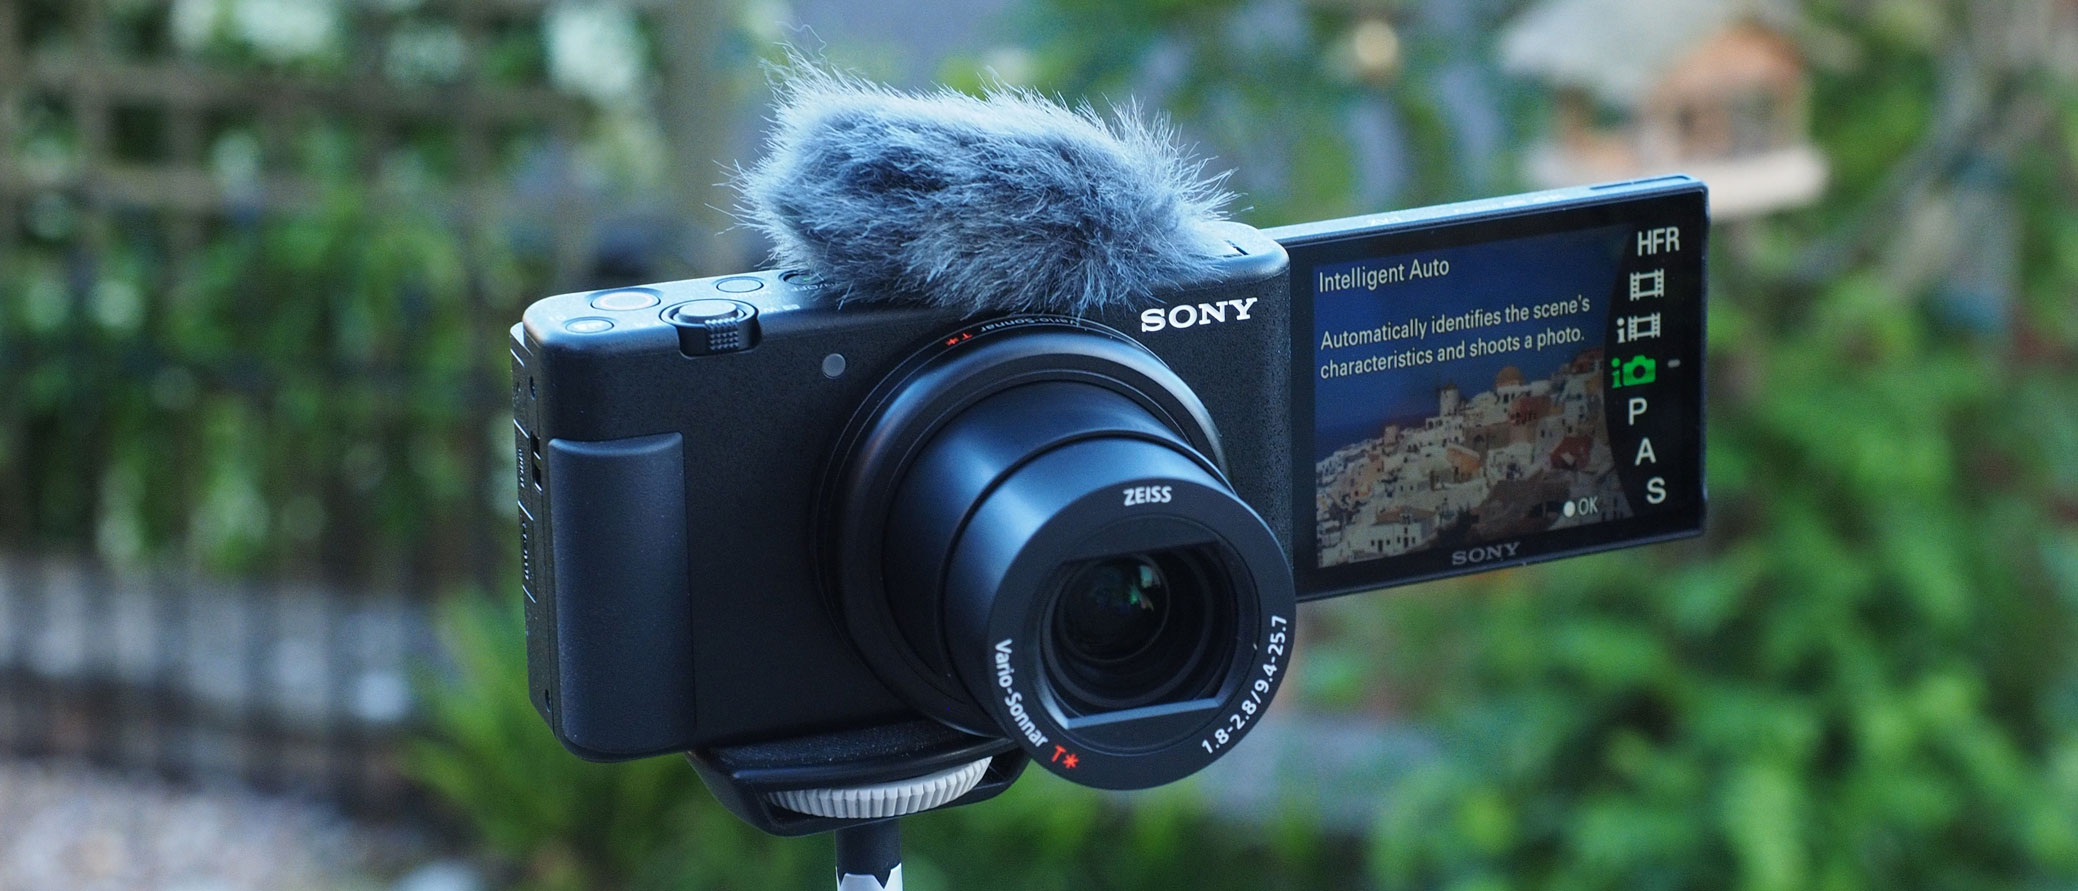 Hands-on with the Sony ZV-1: Digital Photography Review